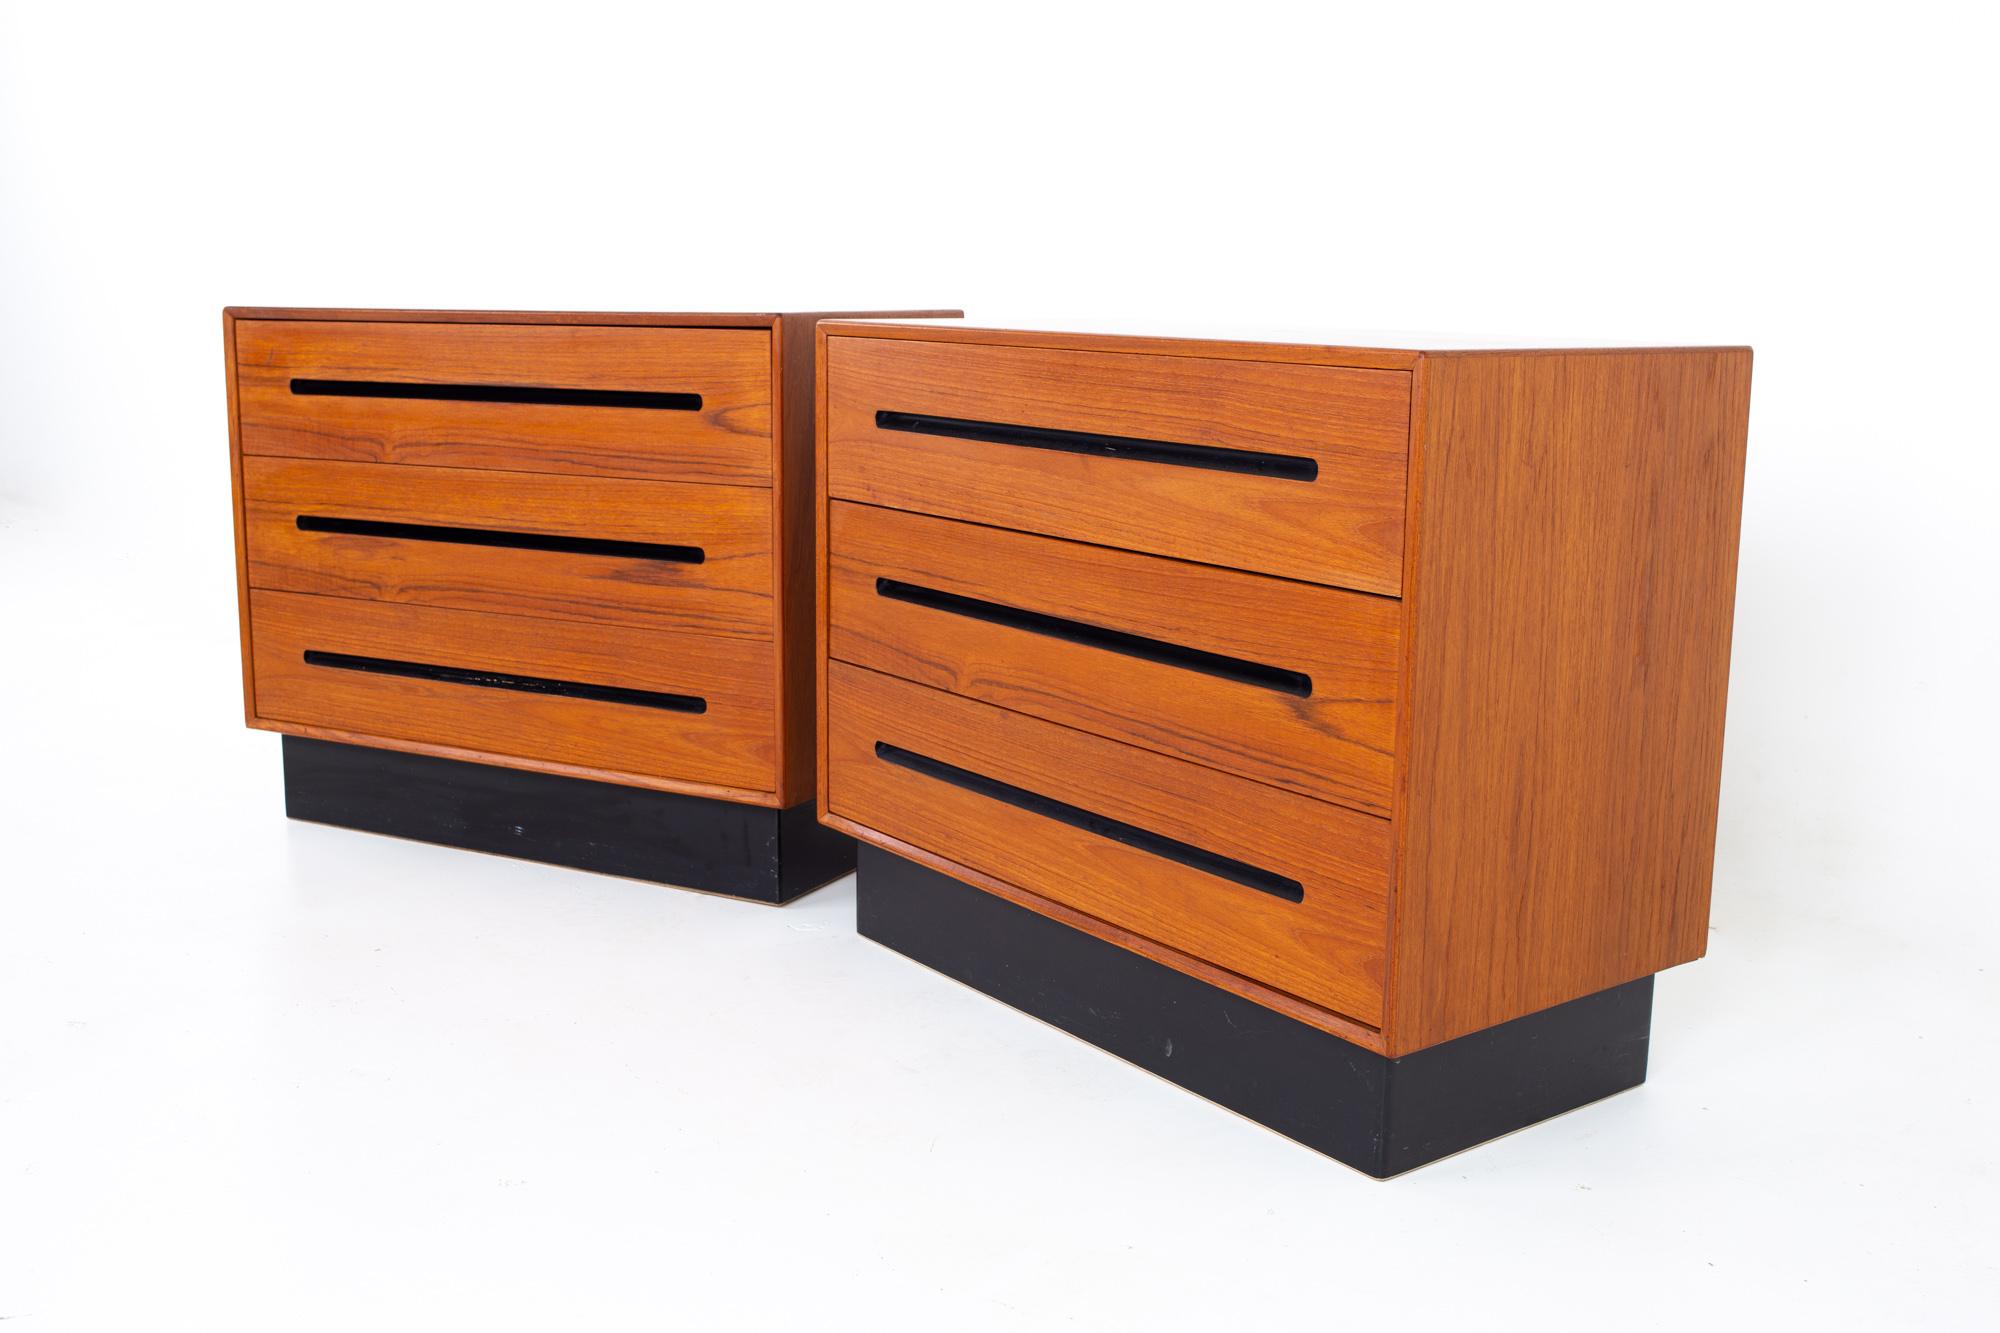 Westnofa mid century teak 3 drawer dresser chest - pair
Each dresser measures: 36 wide x 18 deep x 29 inches high

All pieces of furniture can be had in what we call restored vintage condition. That means the piece is restored upon purchase so